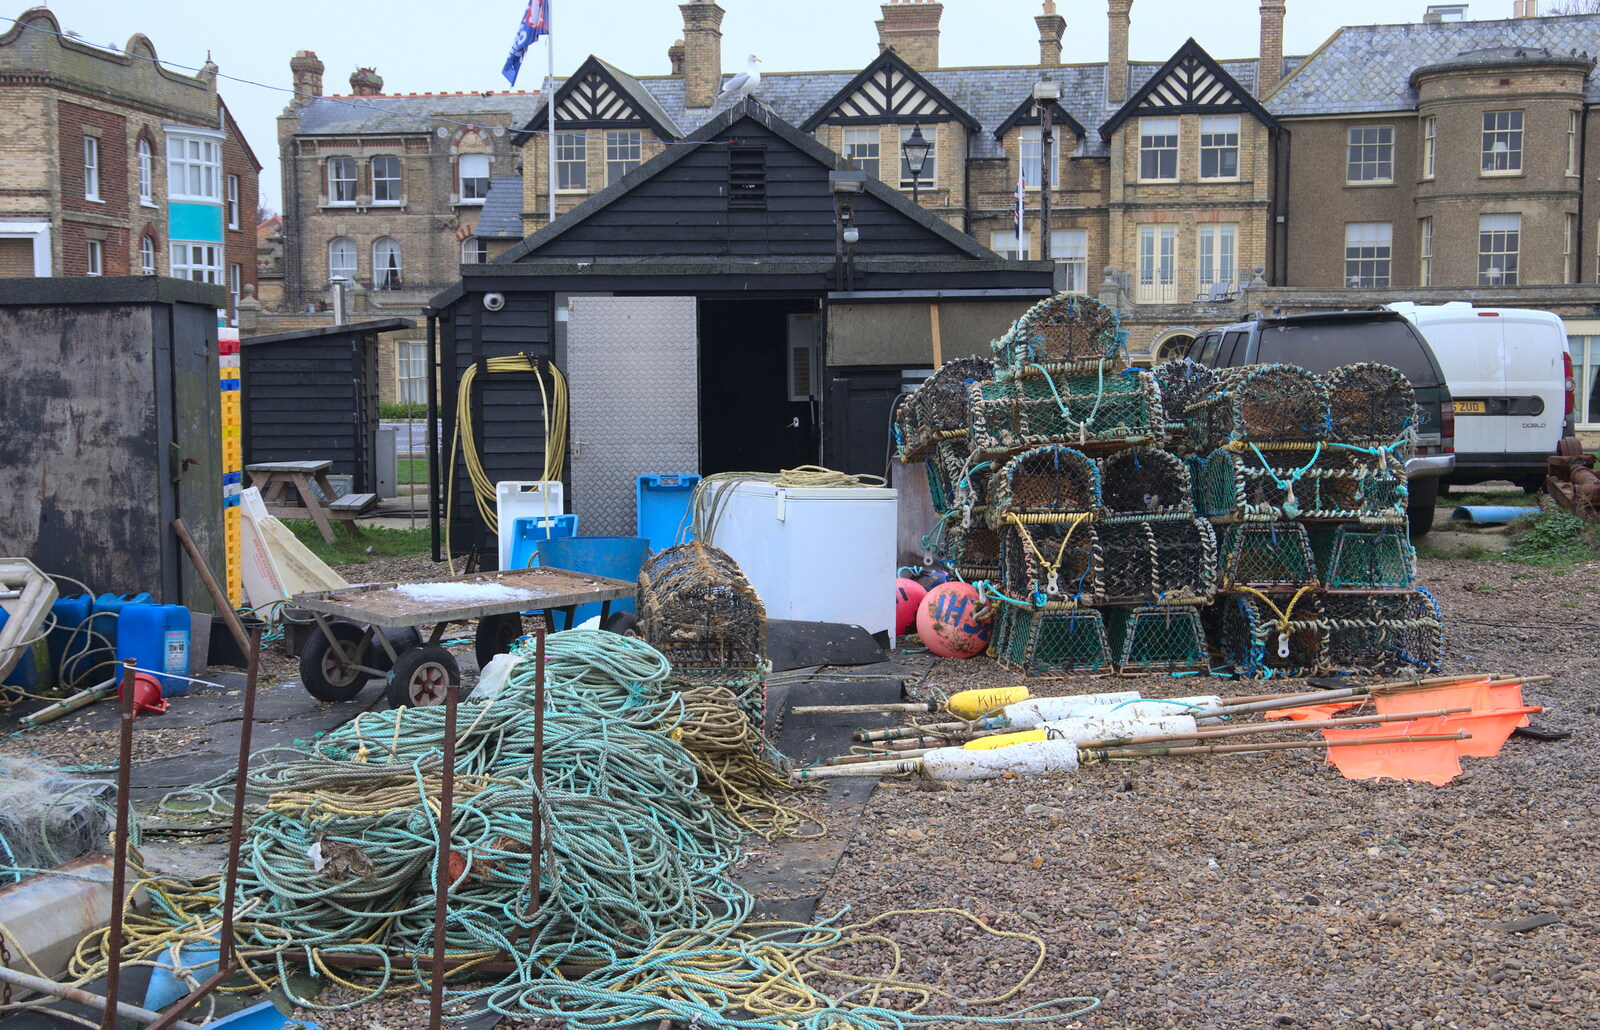 A mess of ropes and old lobster pots from A Postcard from Aldeburgh, Suffolk - 6th January 2019